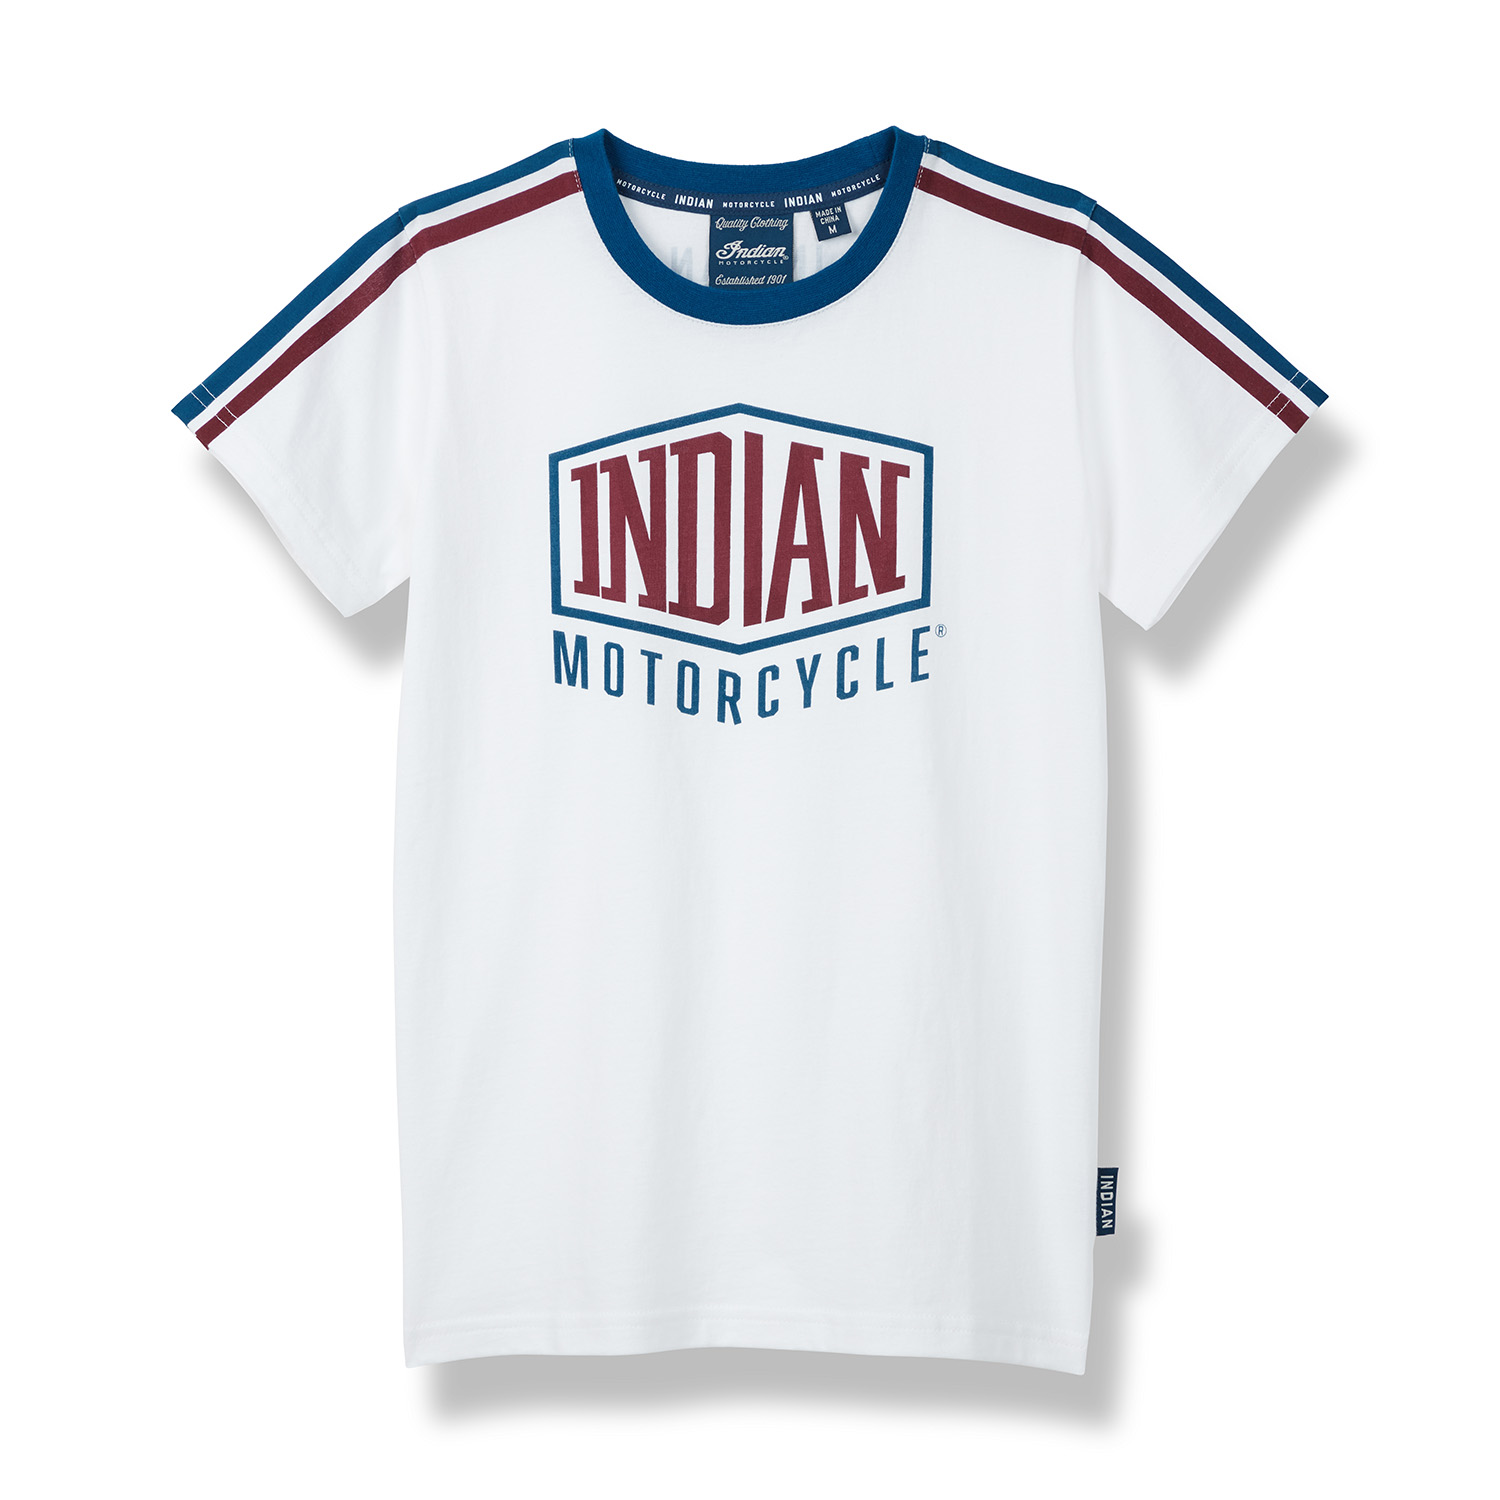 286075803 8-9 Years Indian Motorcycle Kid's Long-Sleeve Motocross T-Shirt White 